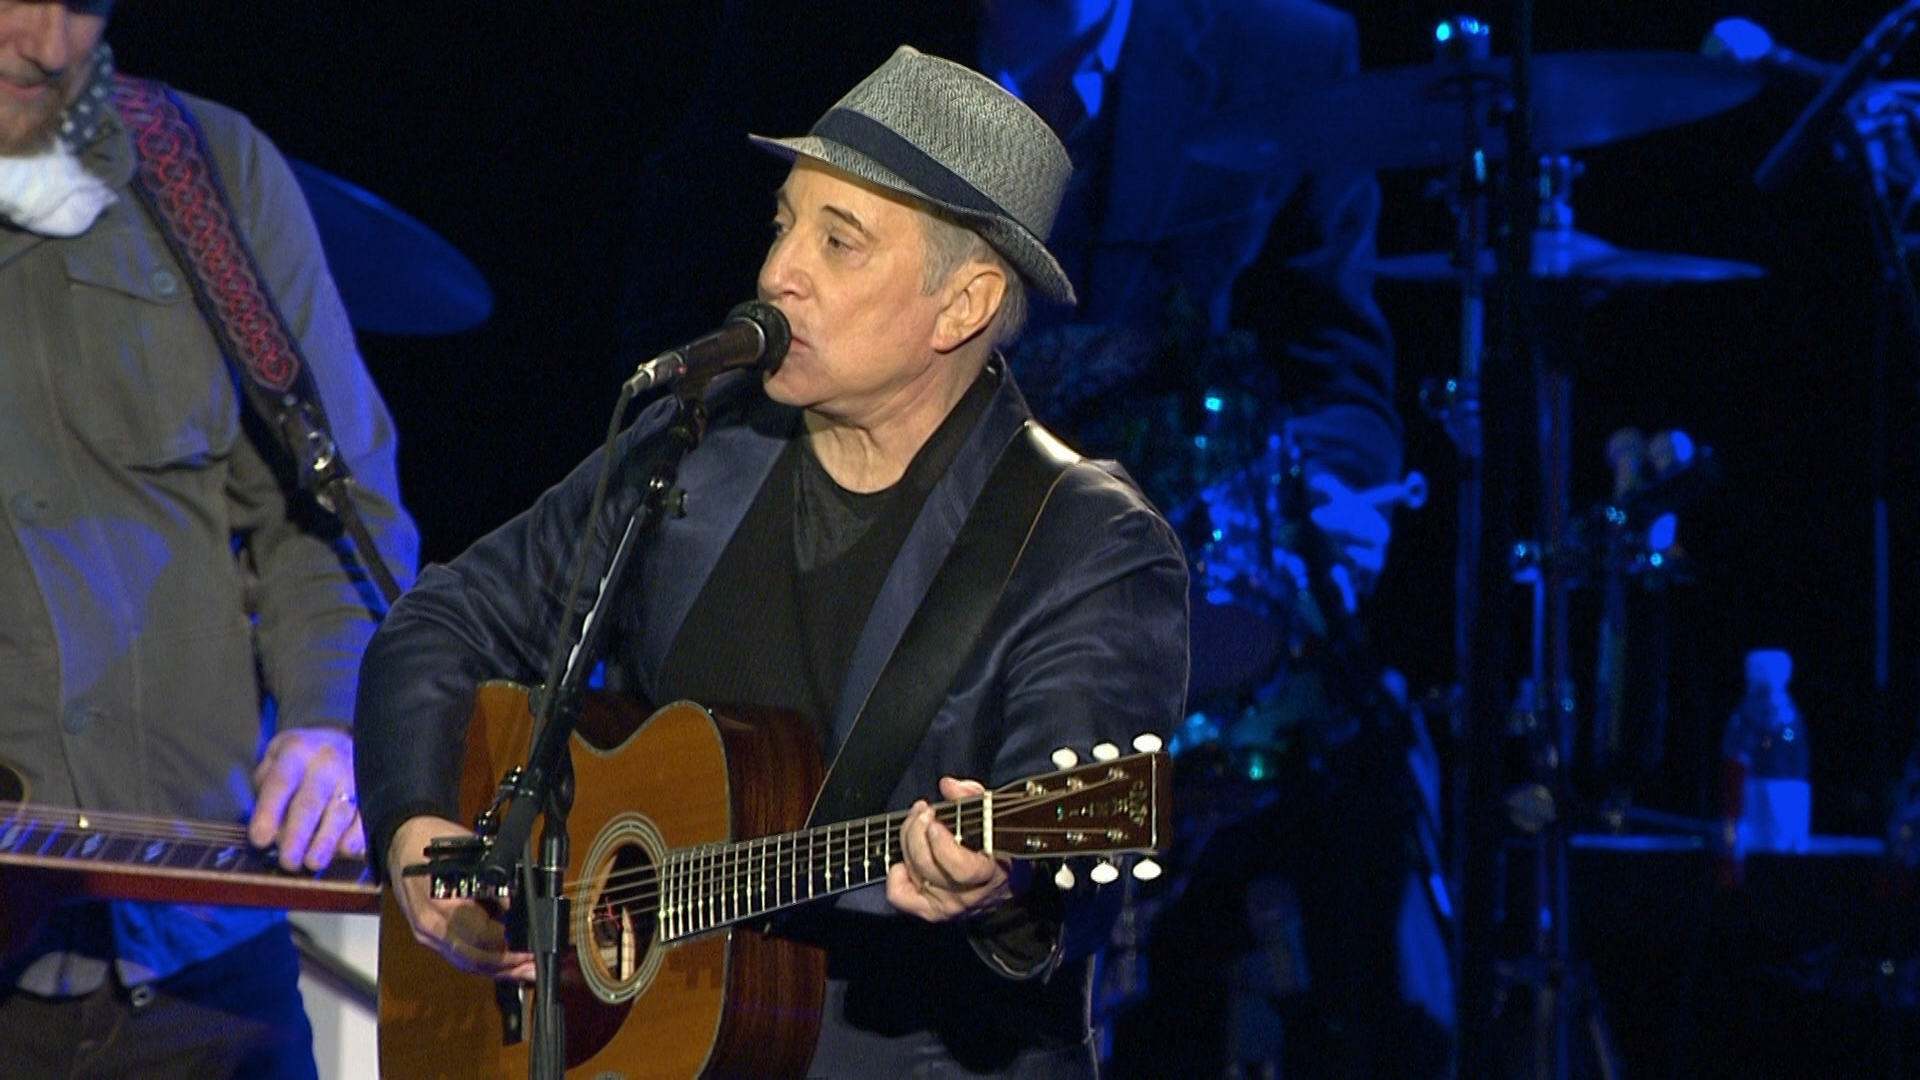 Paul Simon.The Concert in Hyde Park.2017_20171027_200918.072.png